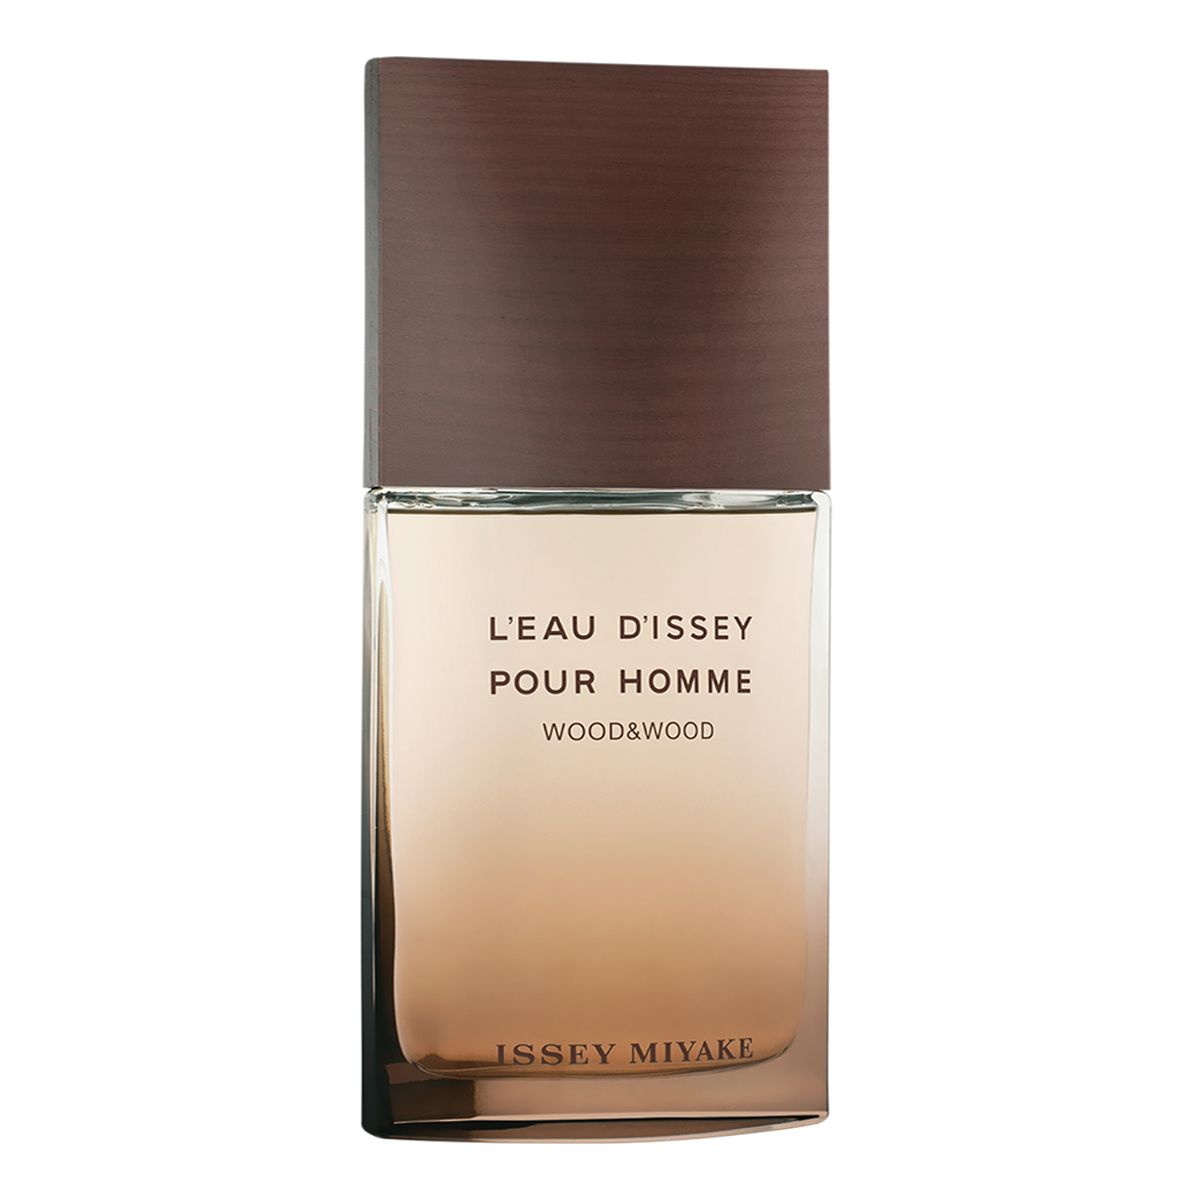 ISSEY MIYAKE L'eau D'issey Pour Homme Wood & Wood EDP 100ml